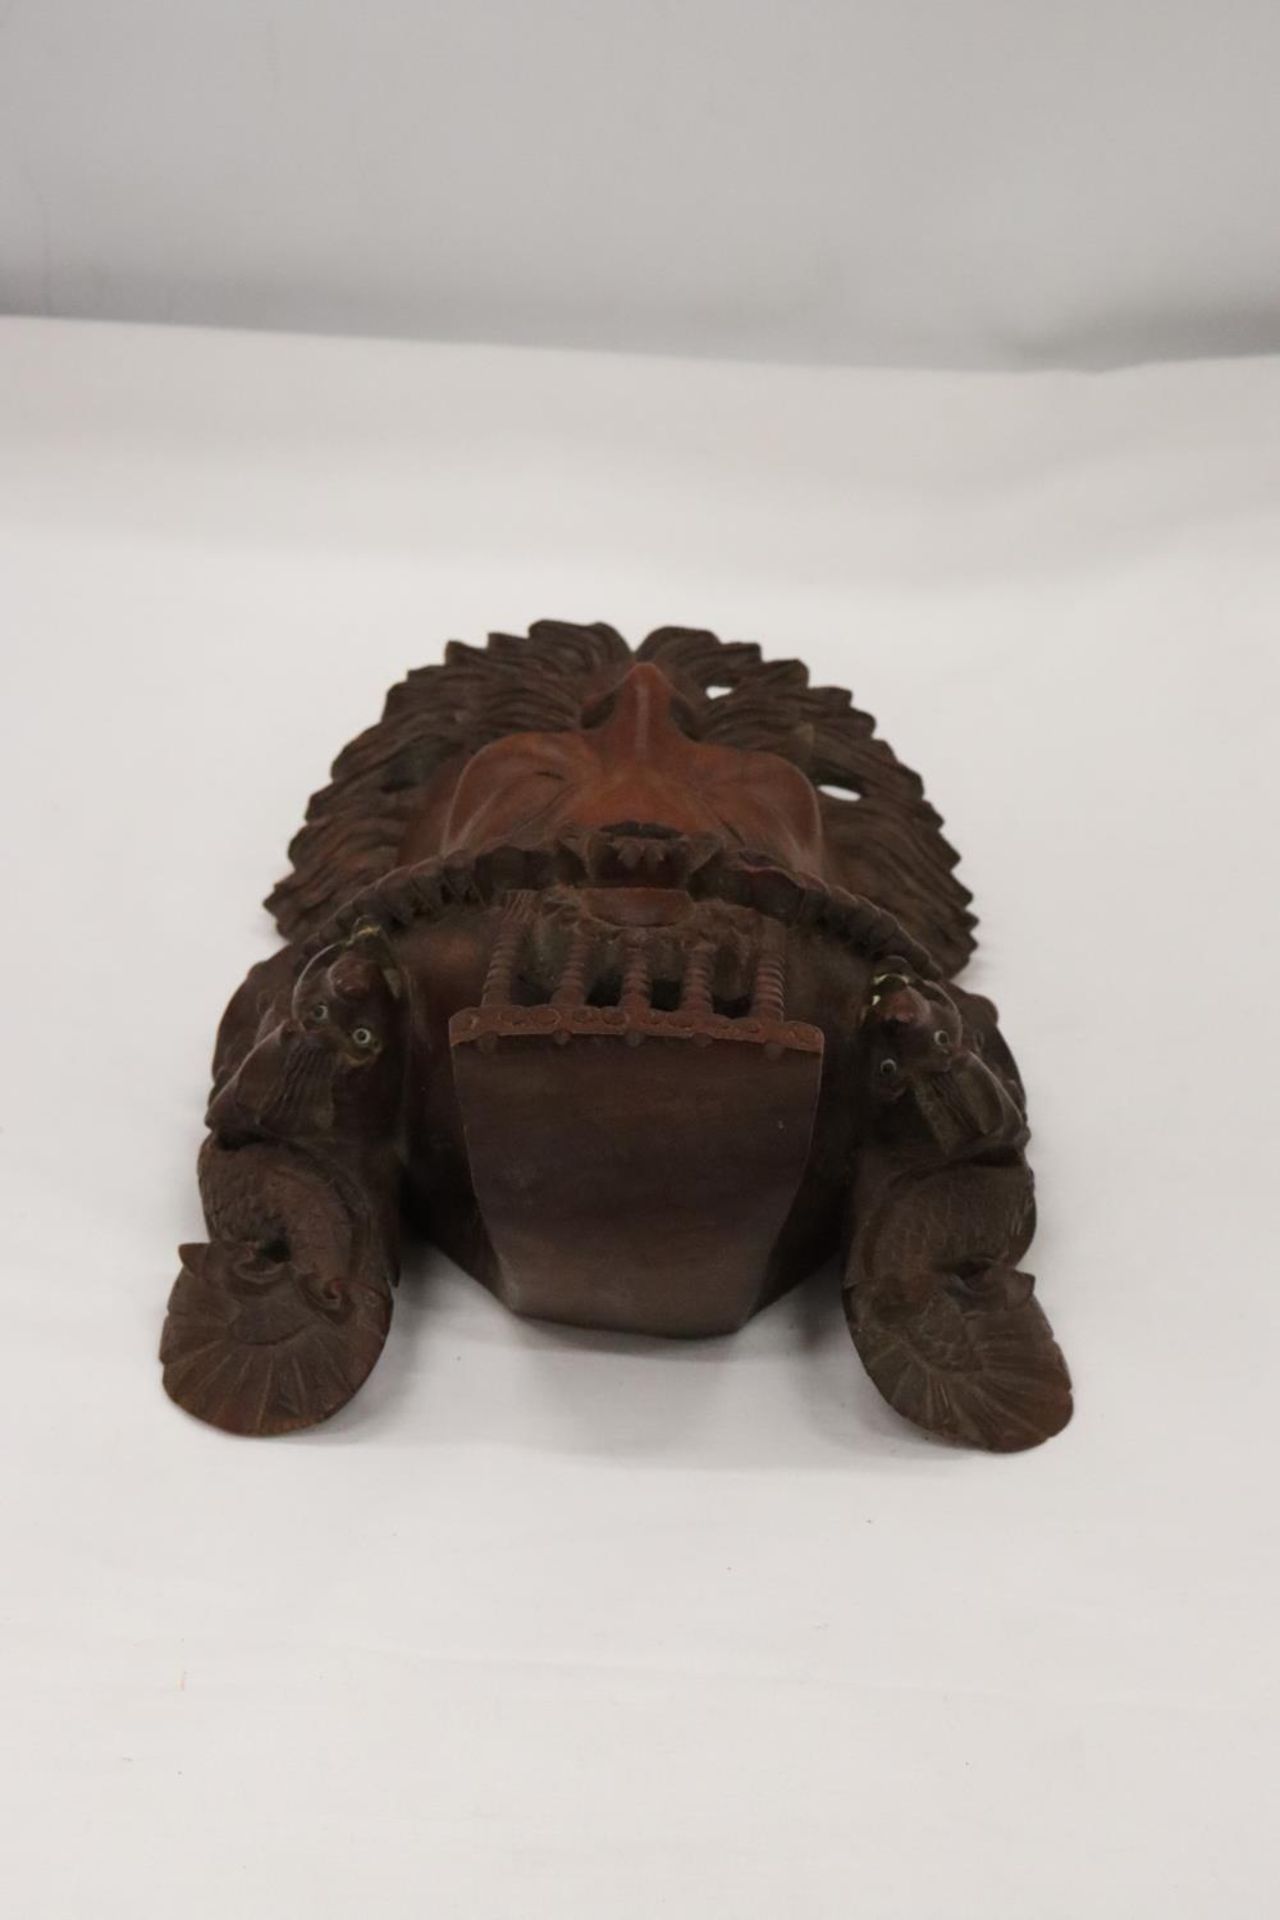 AN ASIAN STYLE CARVED WOODEN MASK - Image 4 of 6